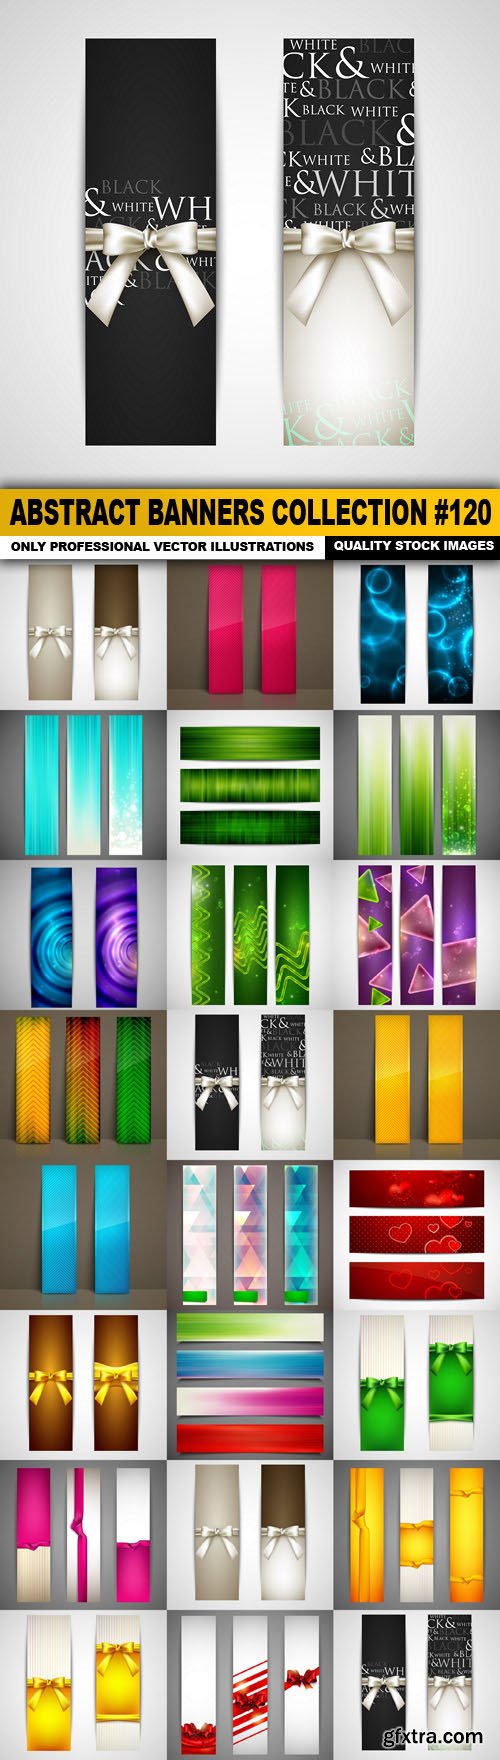 Abstract Banners Collection #120 - 22 Vectors